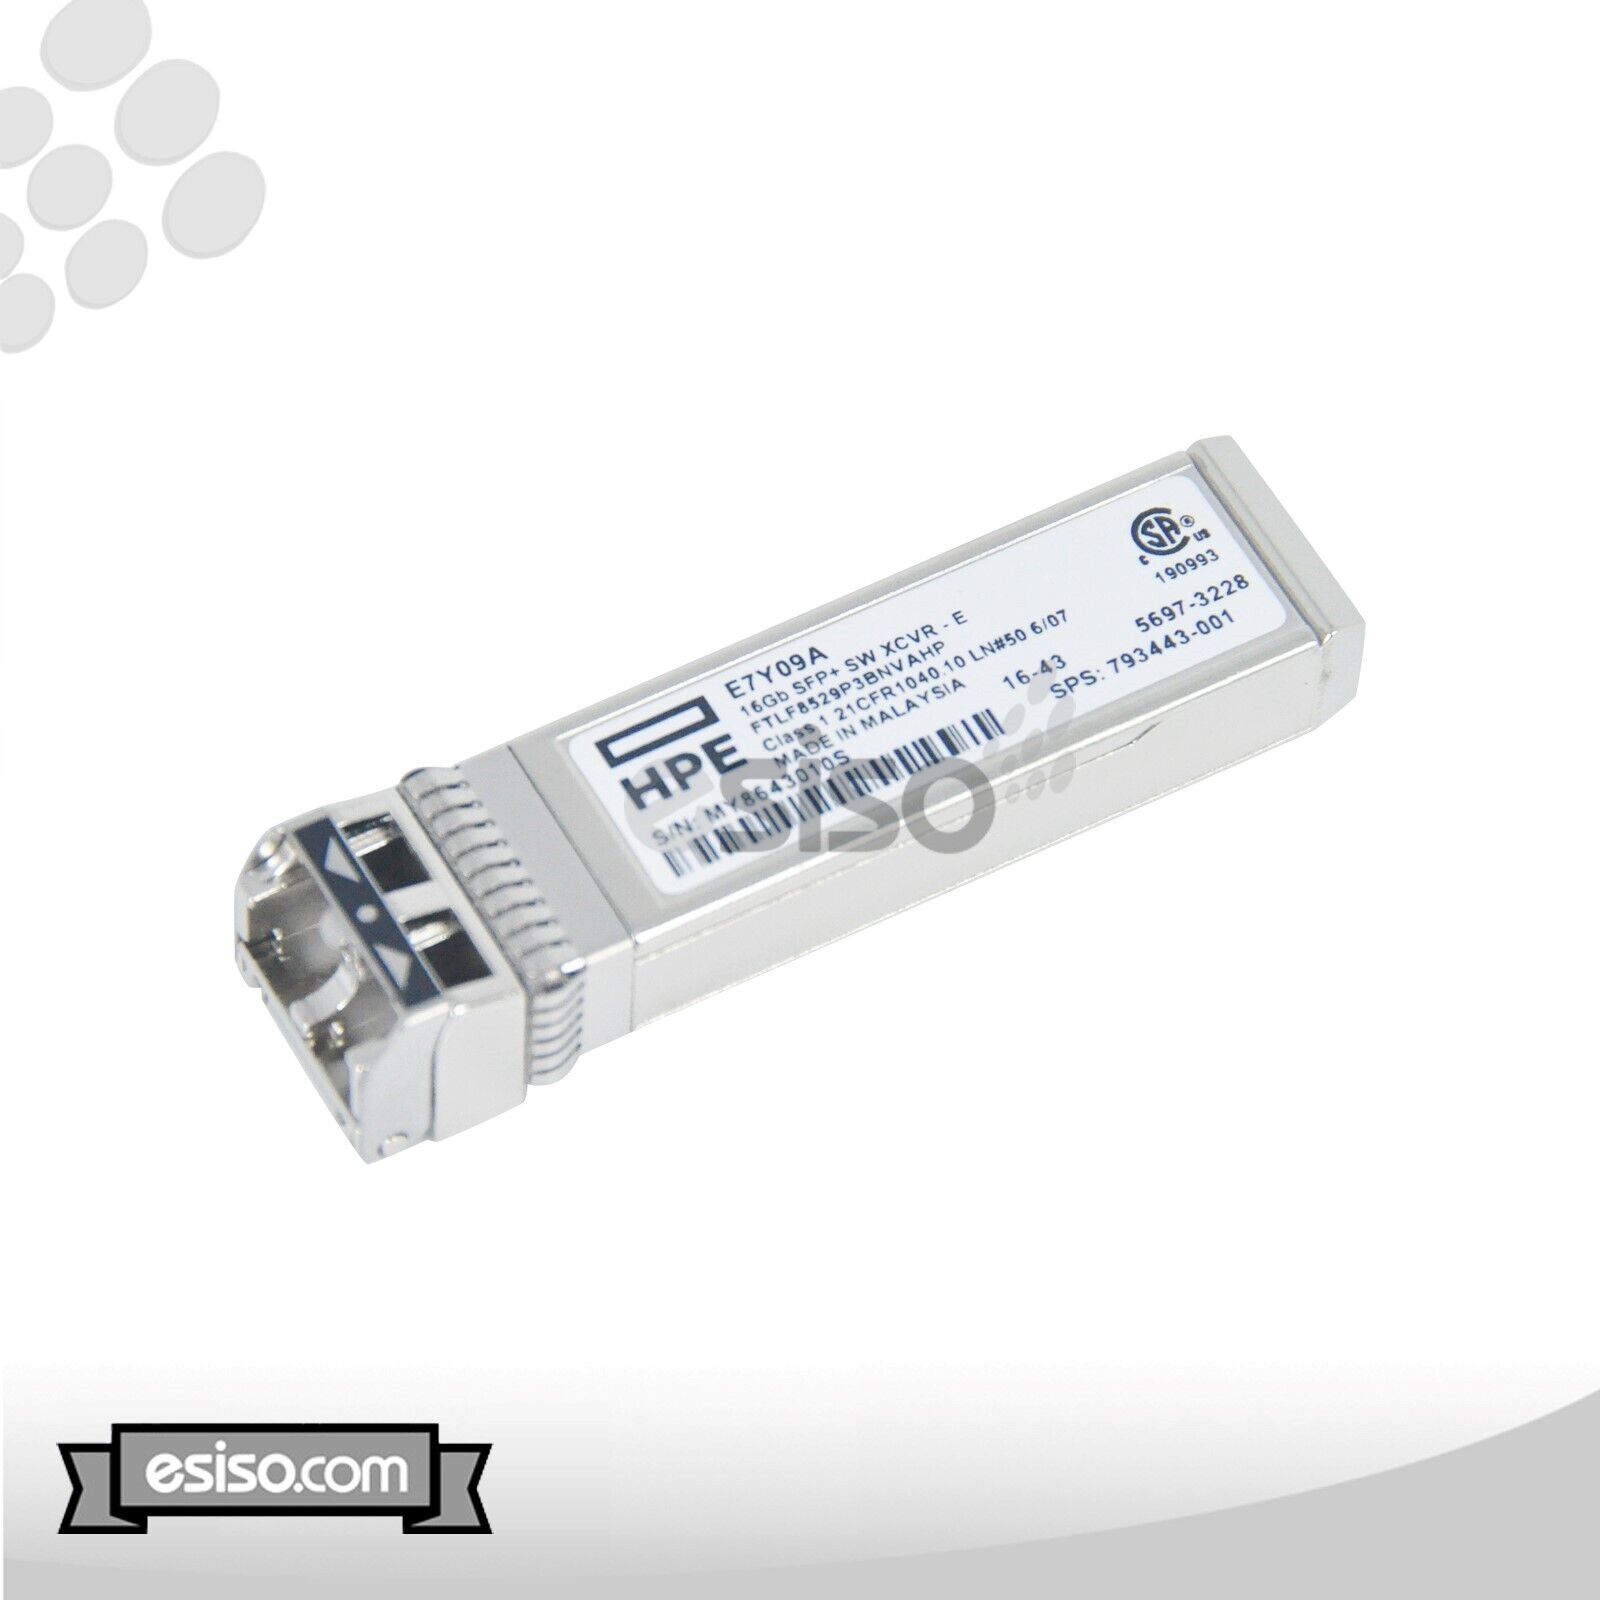 793443-001 E7Y09A HPE 16GB SFP+SHORT WAVE EXTENDED TEMPERATURE TRANSCEIVER